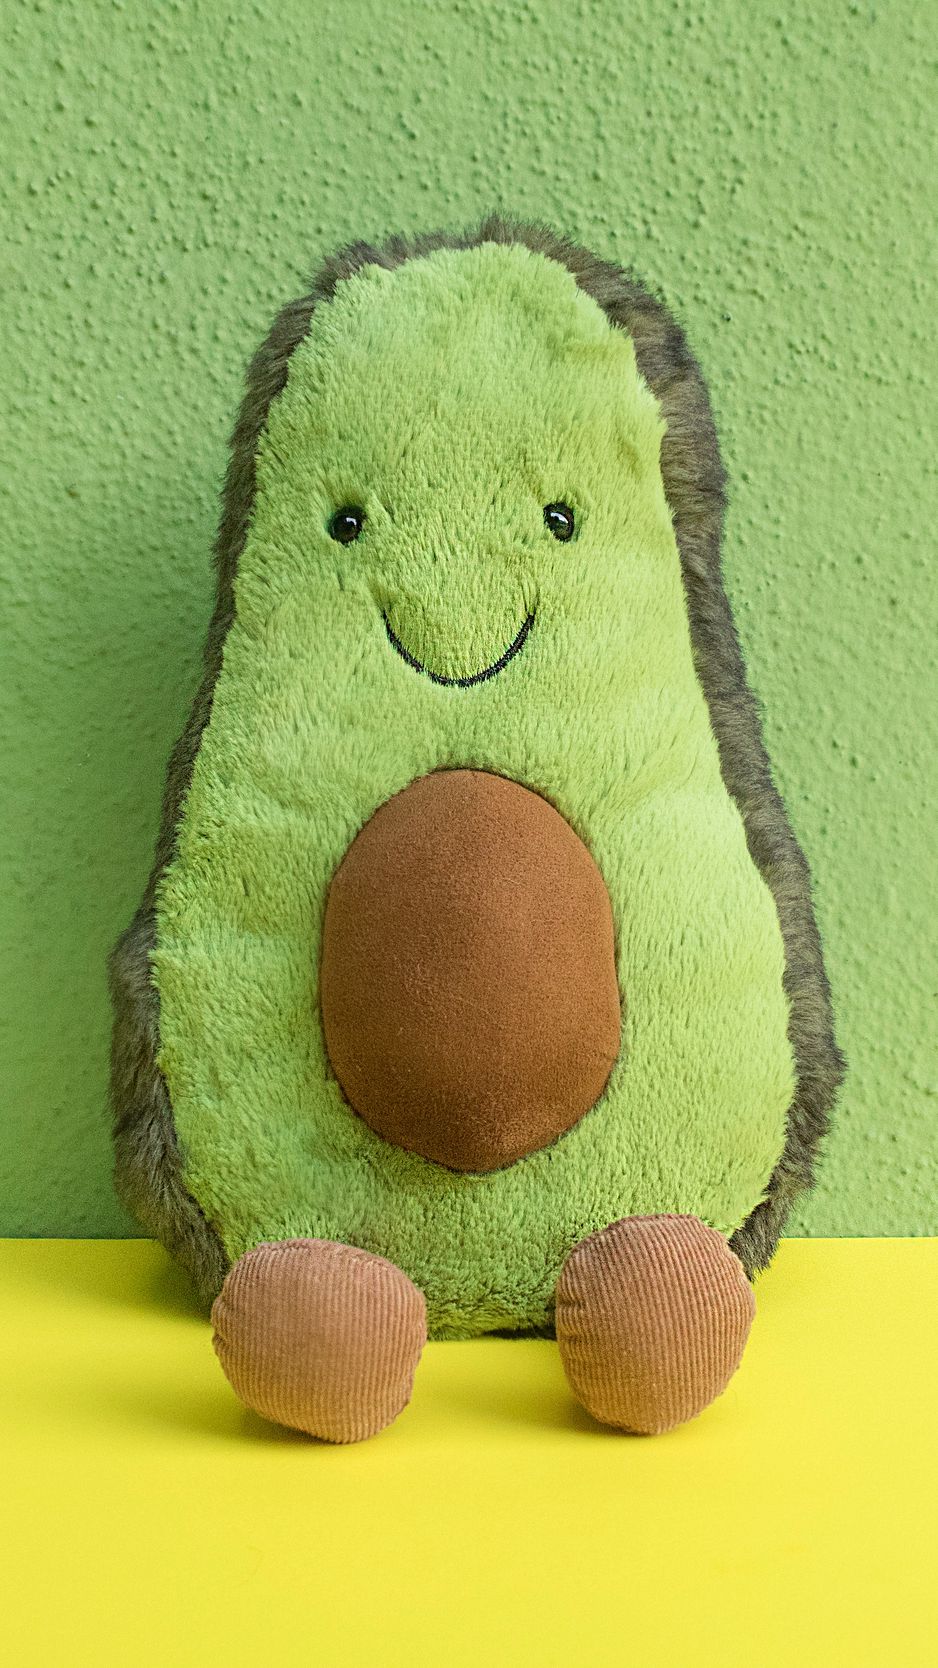 Download wallpaper 938x1668 toy, teddy, avocado, cute, green iphone  8/7/6s/6 for parallax hd background